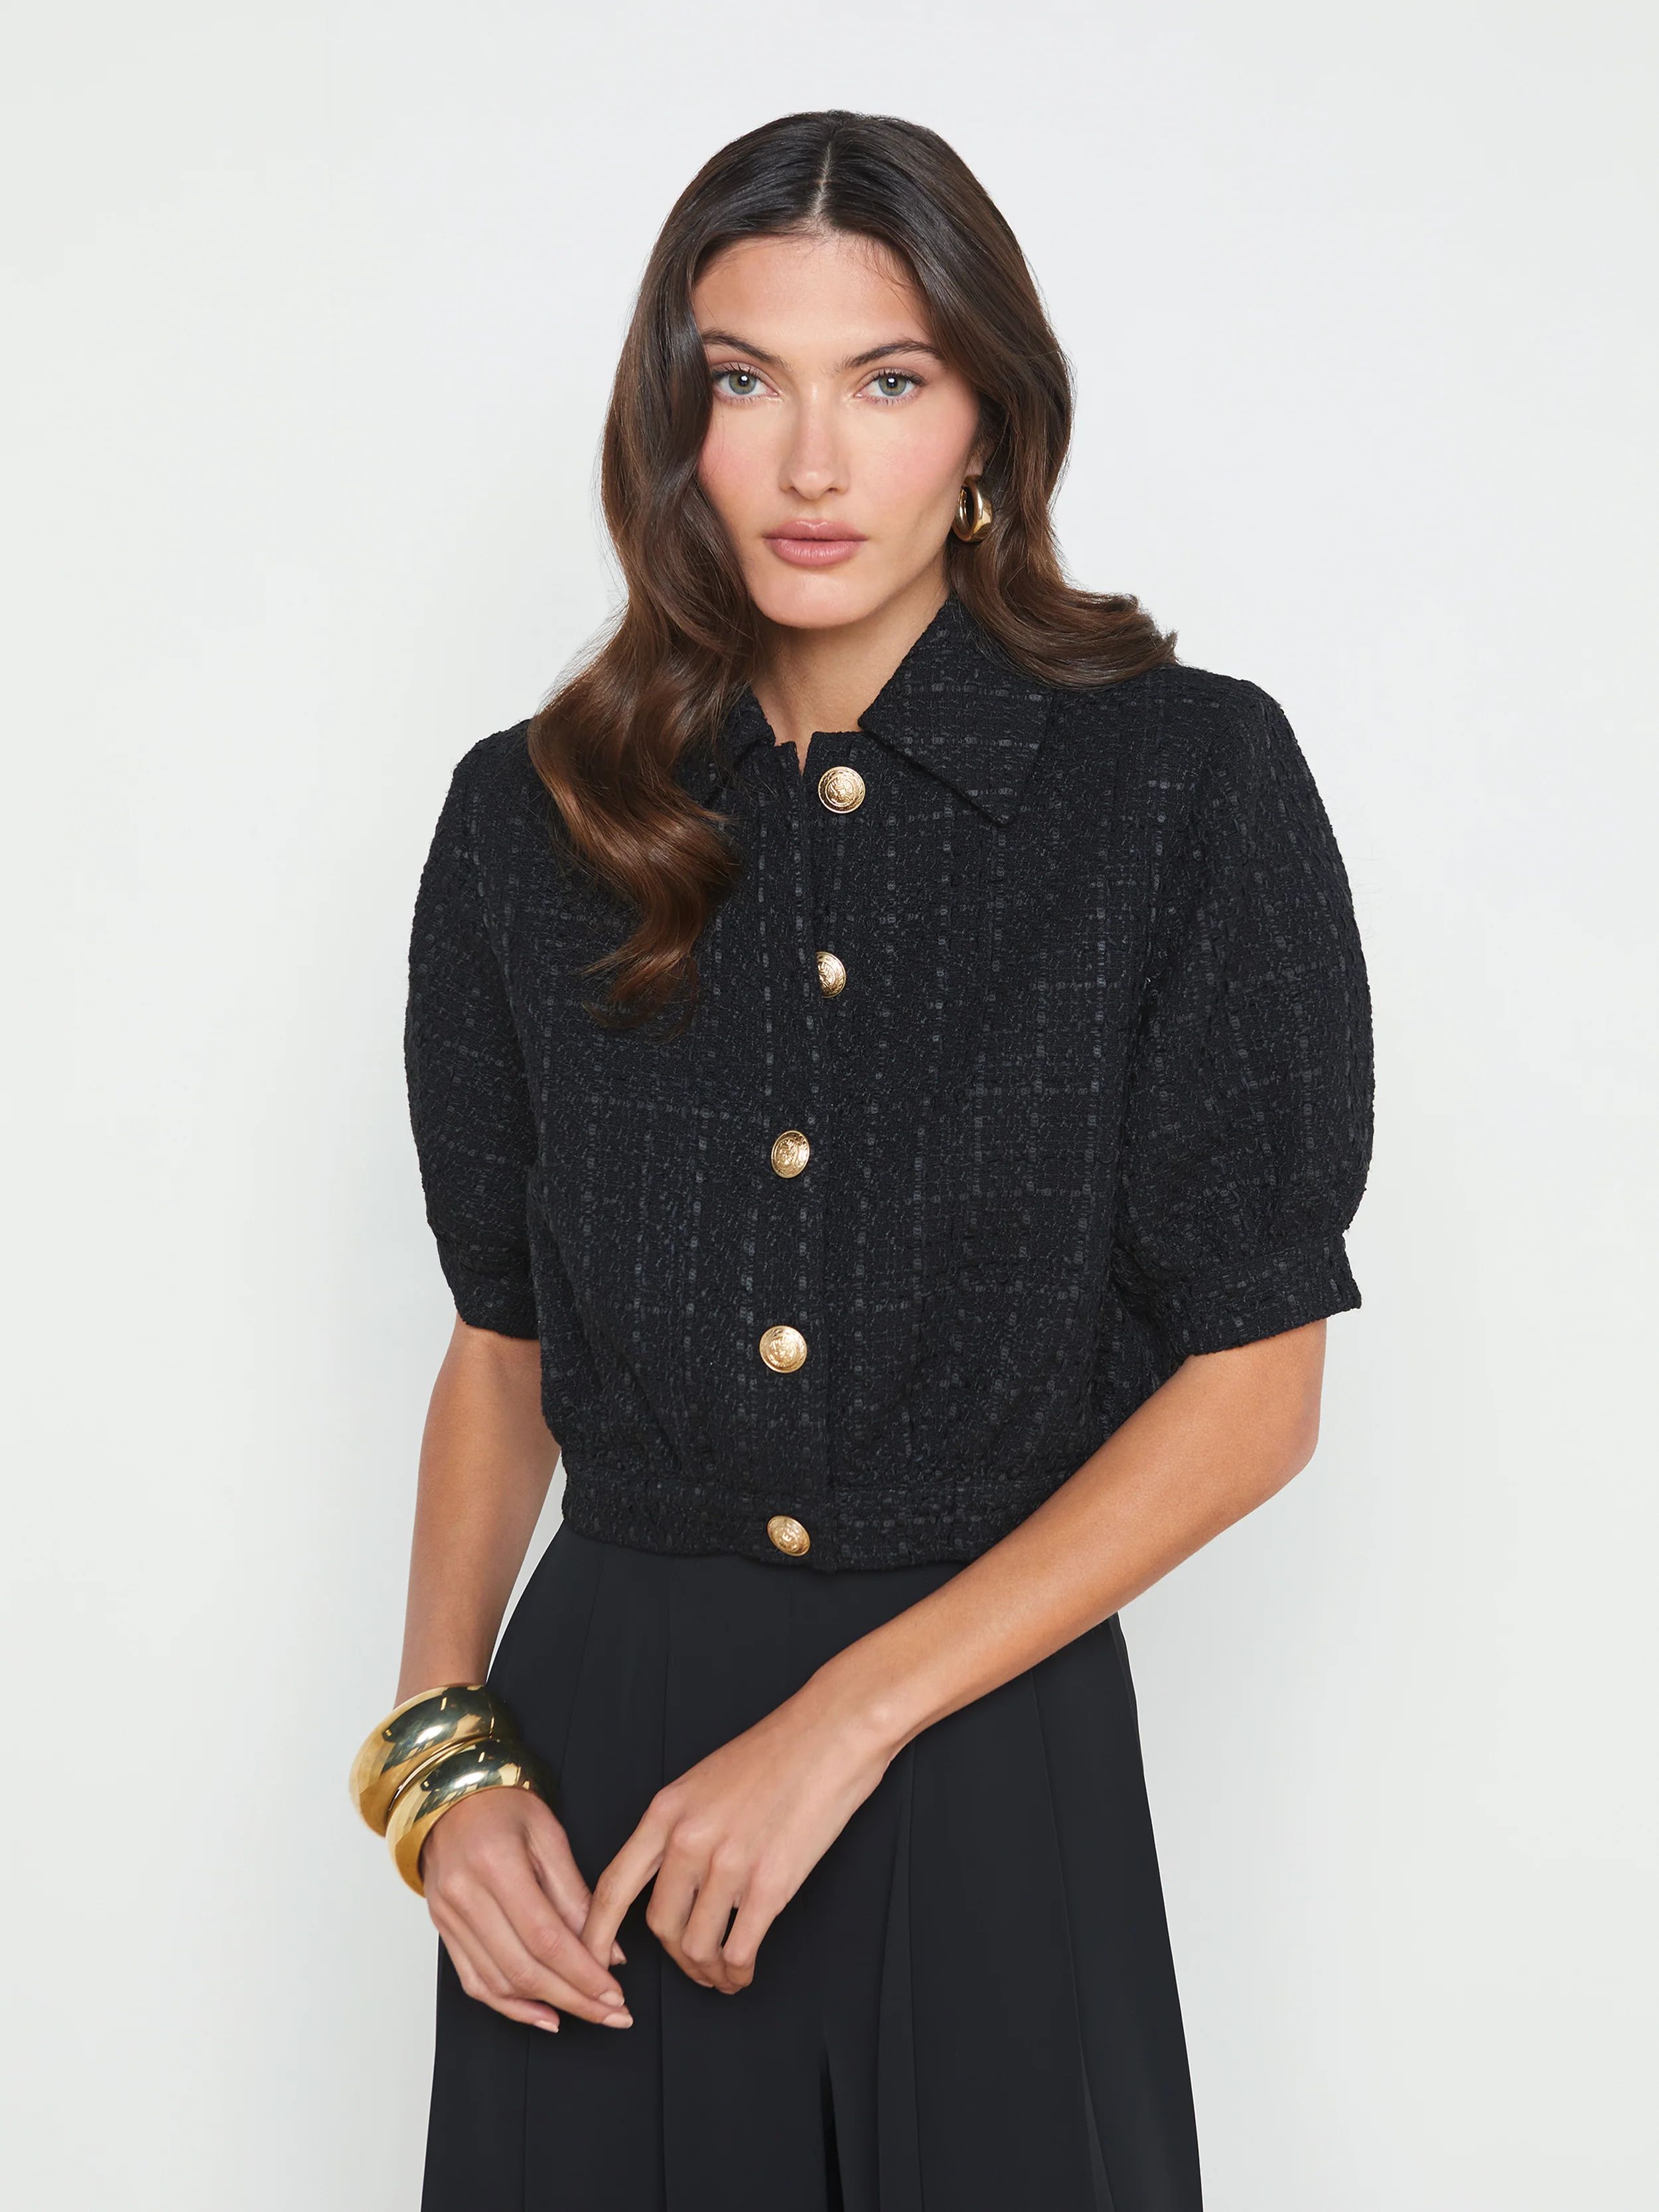 L'AGENCE - Cove Cropped Tweed Jacket in Black | L'Agence